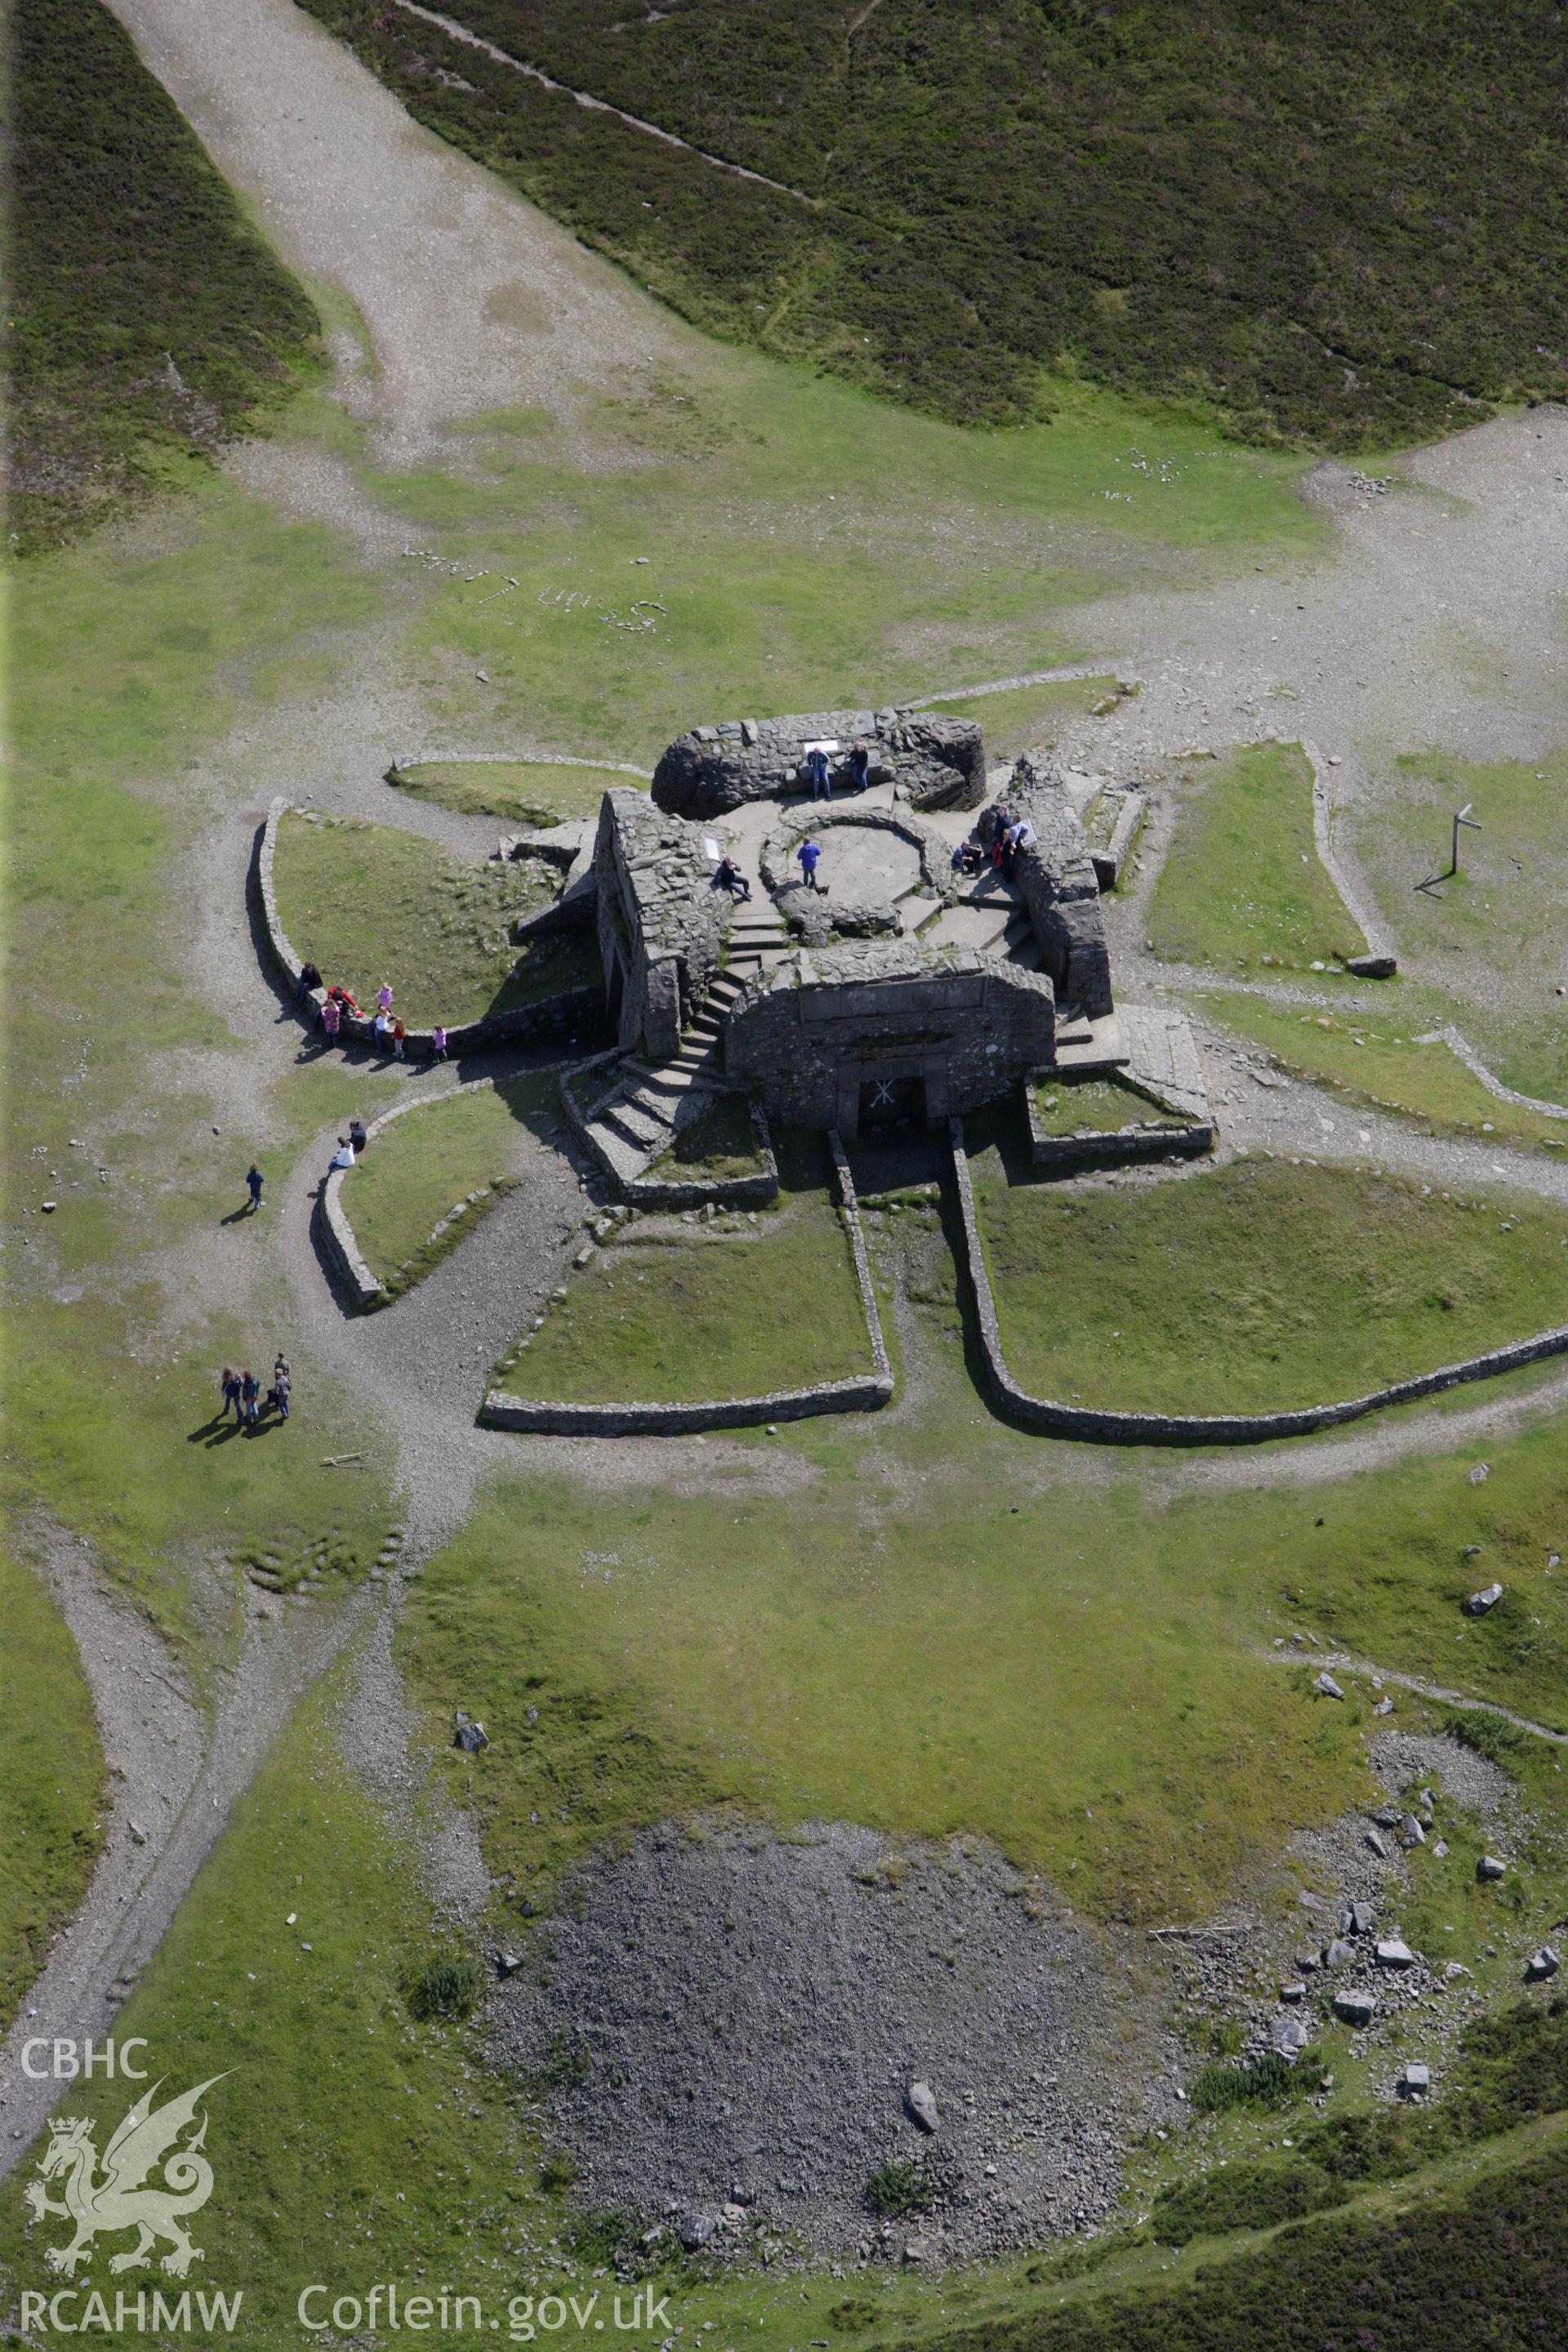 RCAHMW colour oblique aerial photograph of Jubilee Tower, Moel Famau, Llangynhafal. Taken on 30 July 2009 by Toby Driver